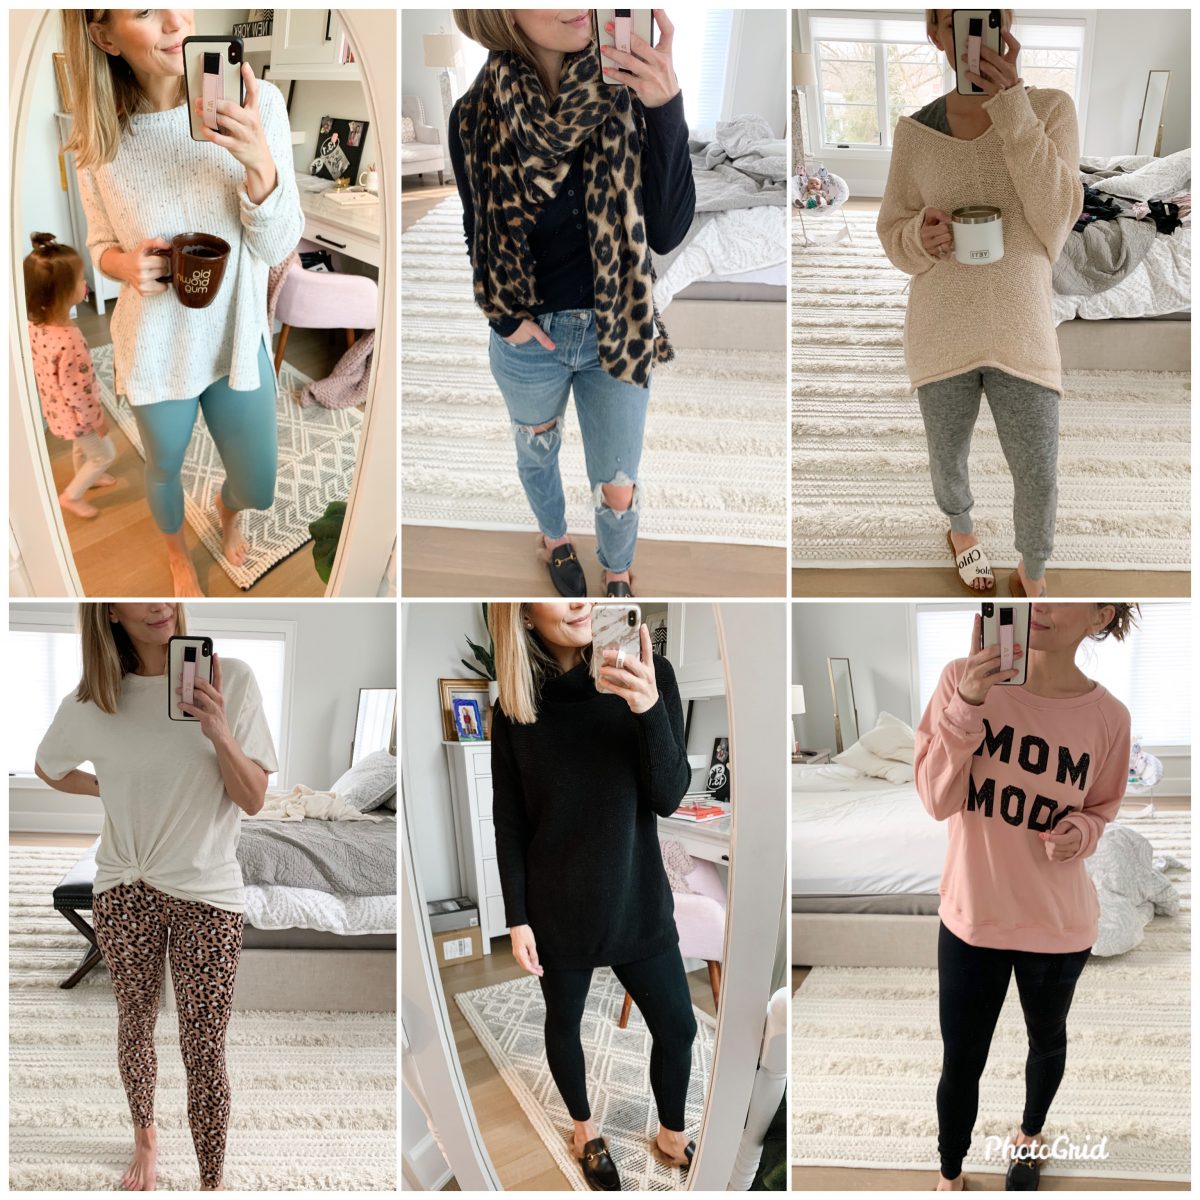 10 Outfit Ideas For When You Don't Want To Get Dressed (Postpartum-Friendly!)  - My Kind of Sweet